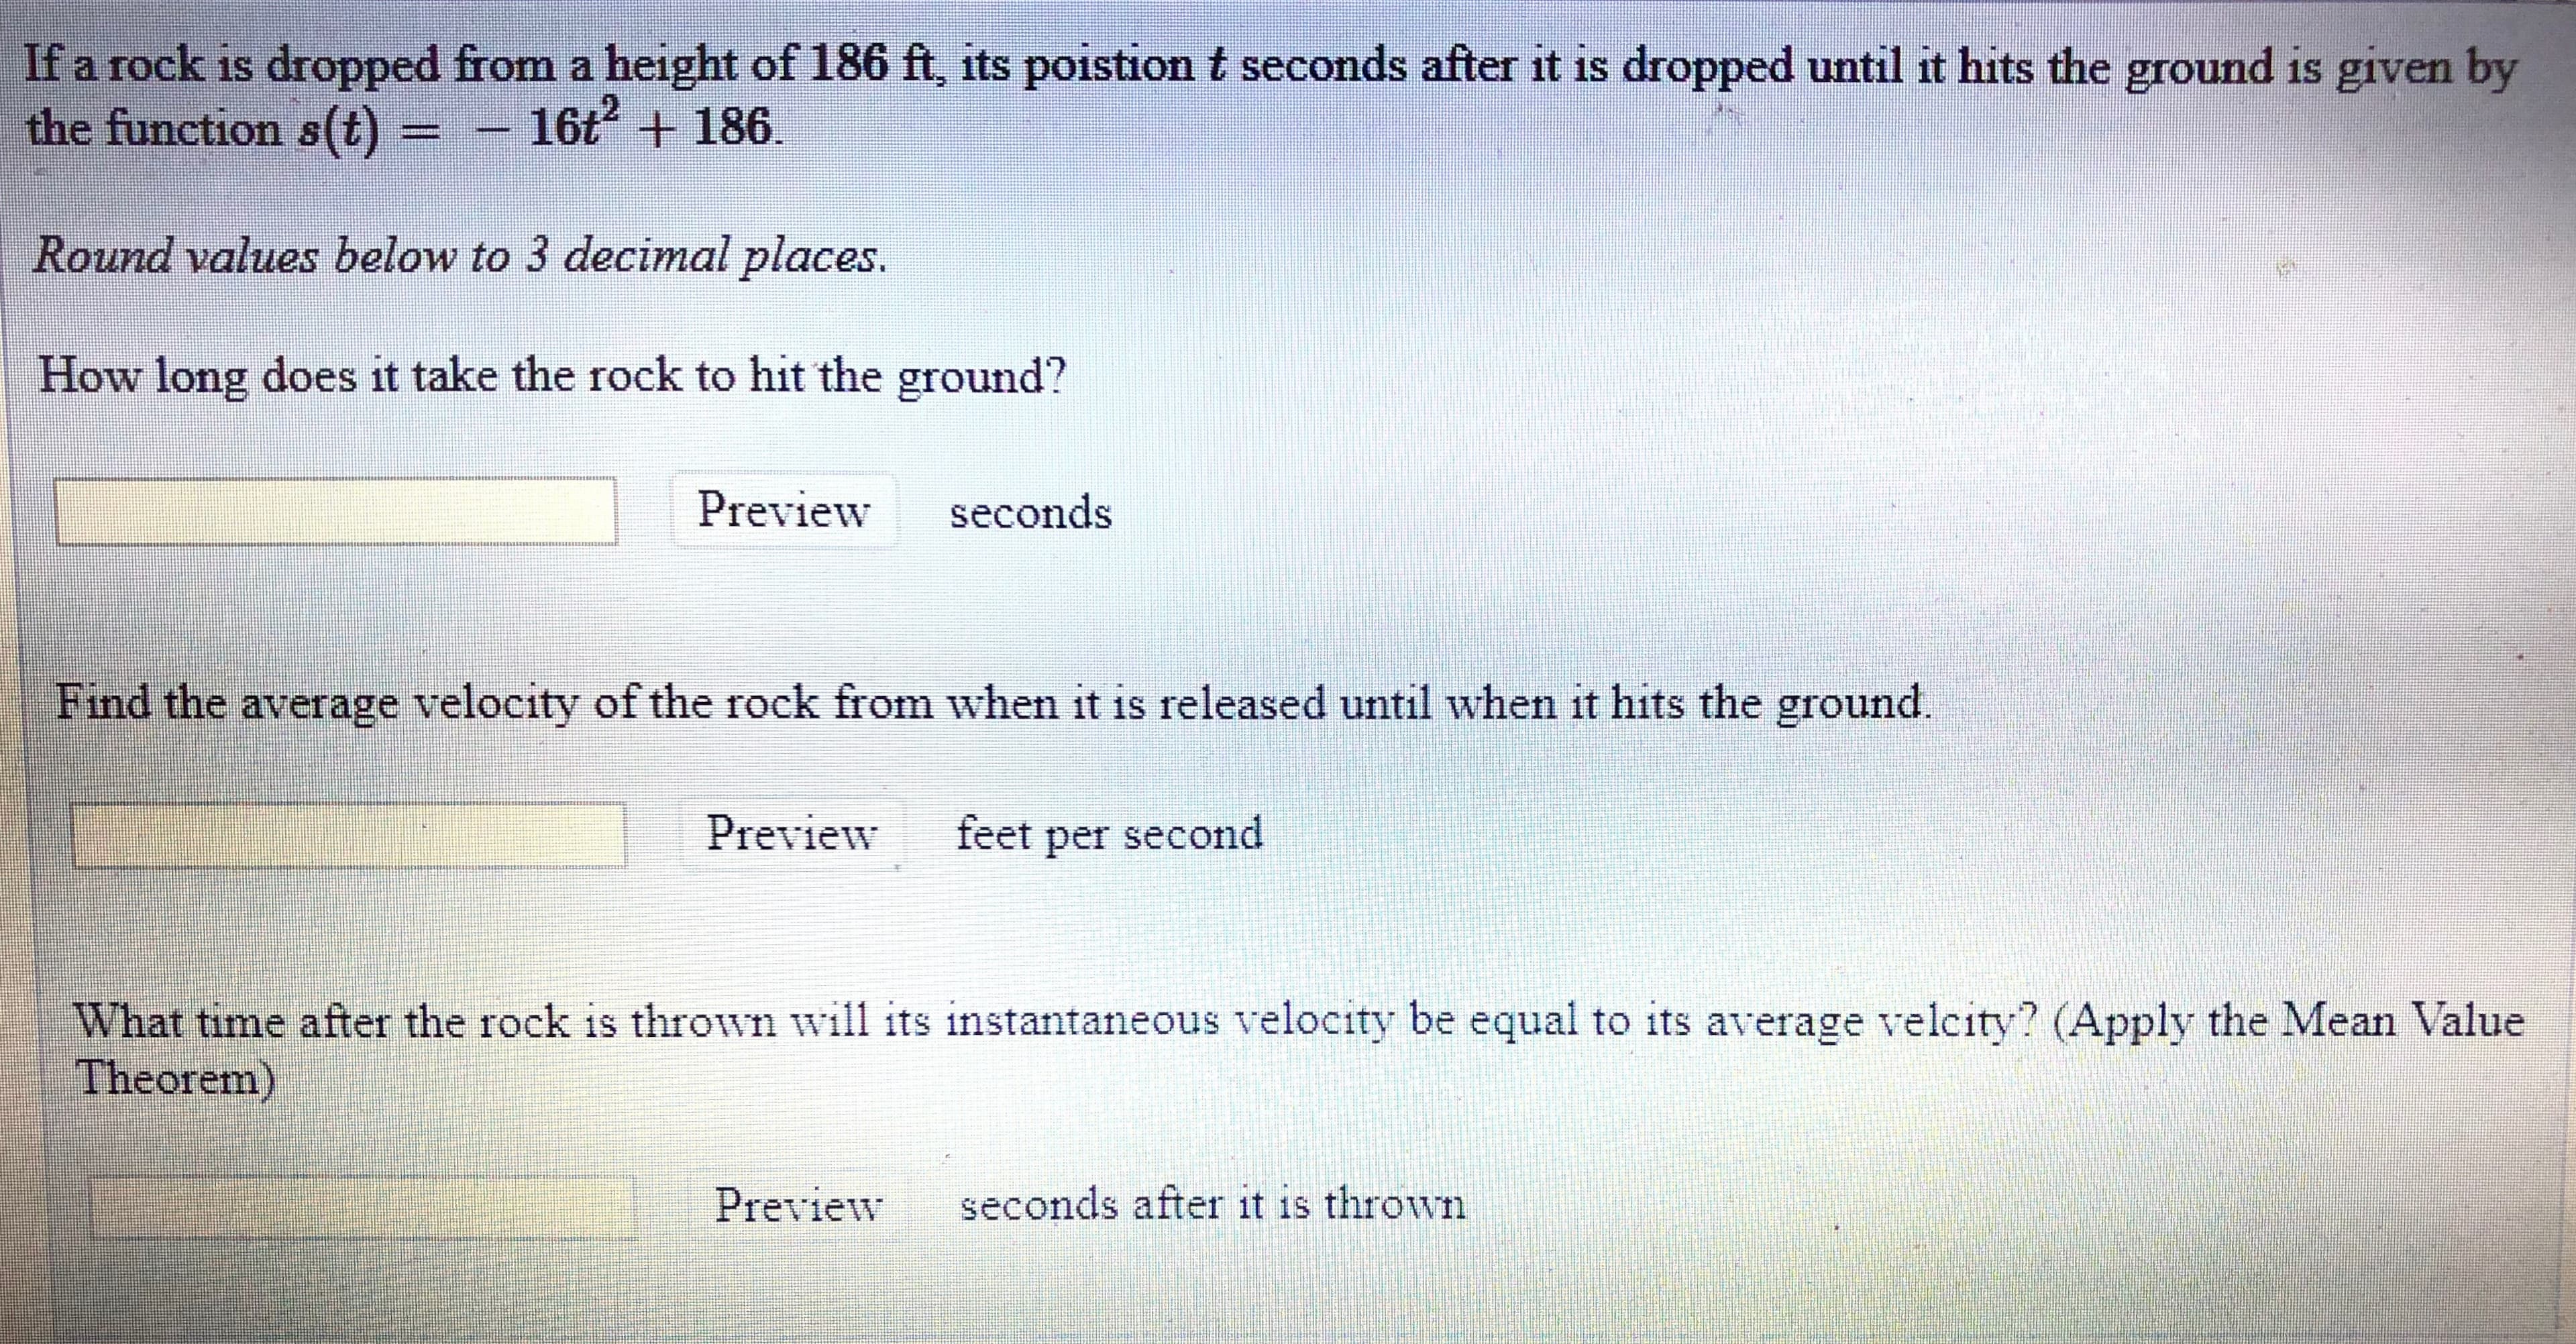 If a rock is dropped from a height of 186 ft, its poistion t seconds after it is dropped until it hits the ground is given by
the function s(t) = - 16t + 186.
